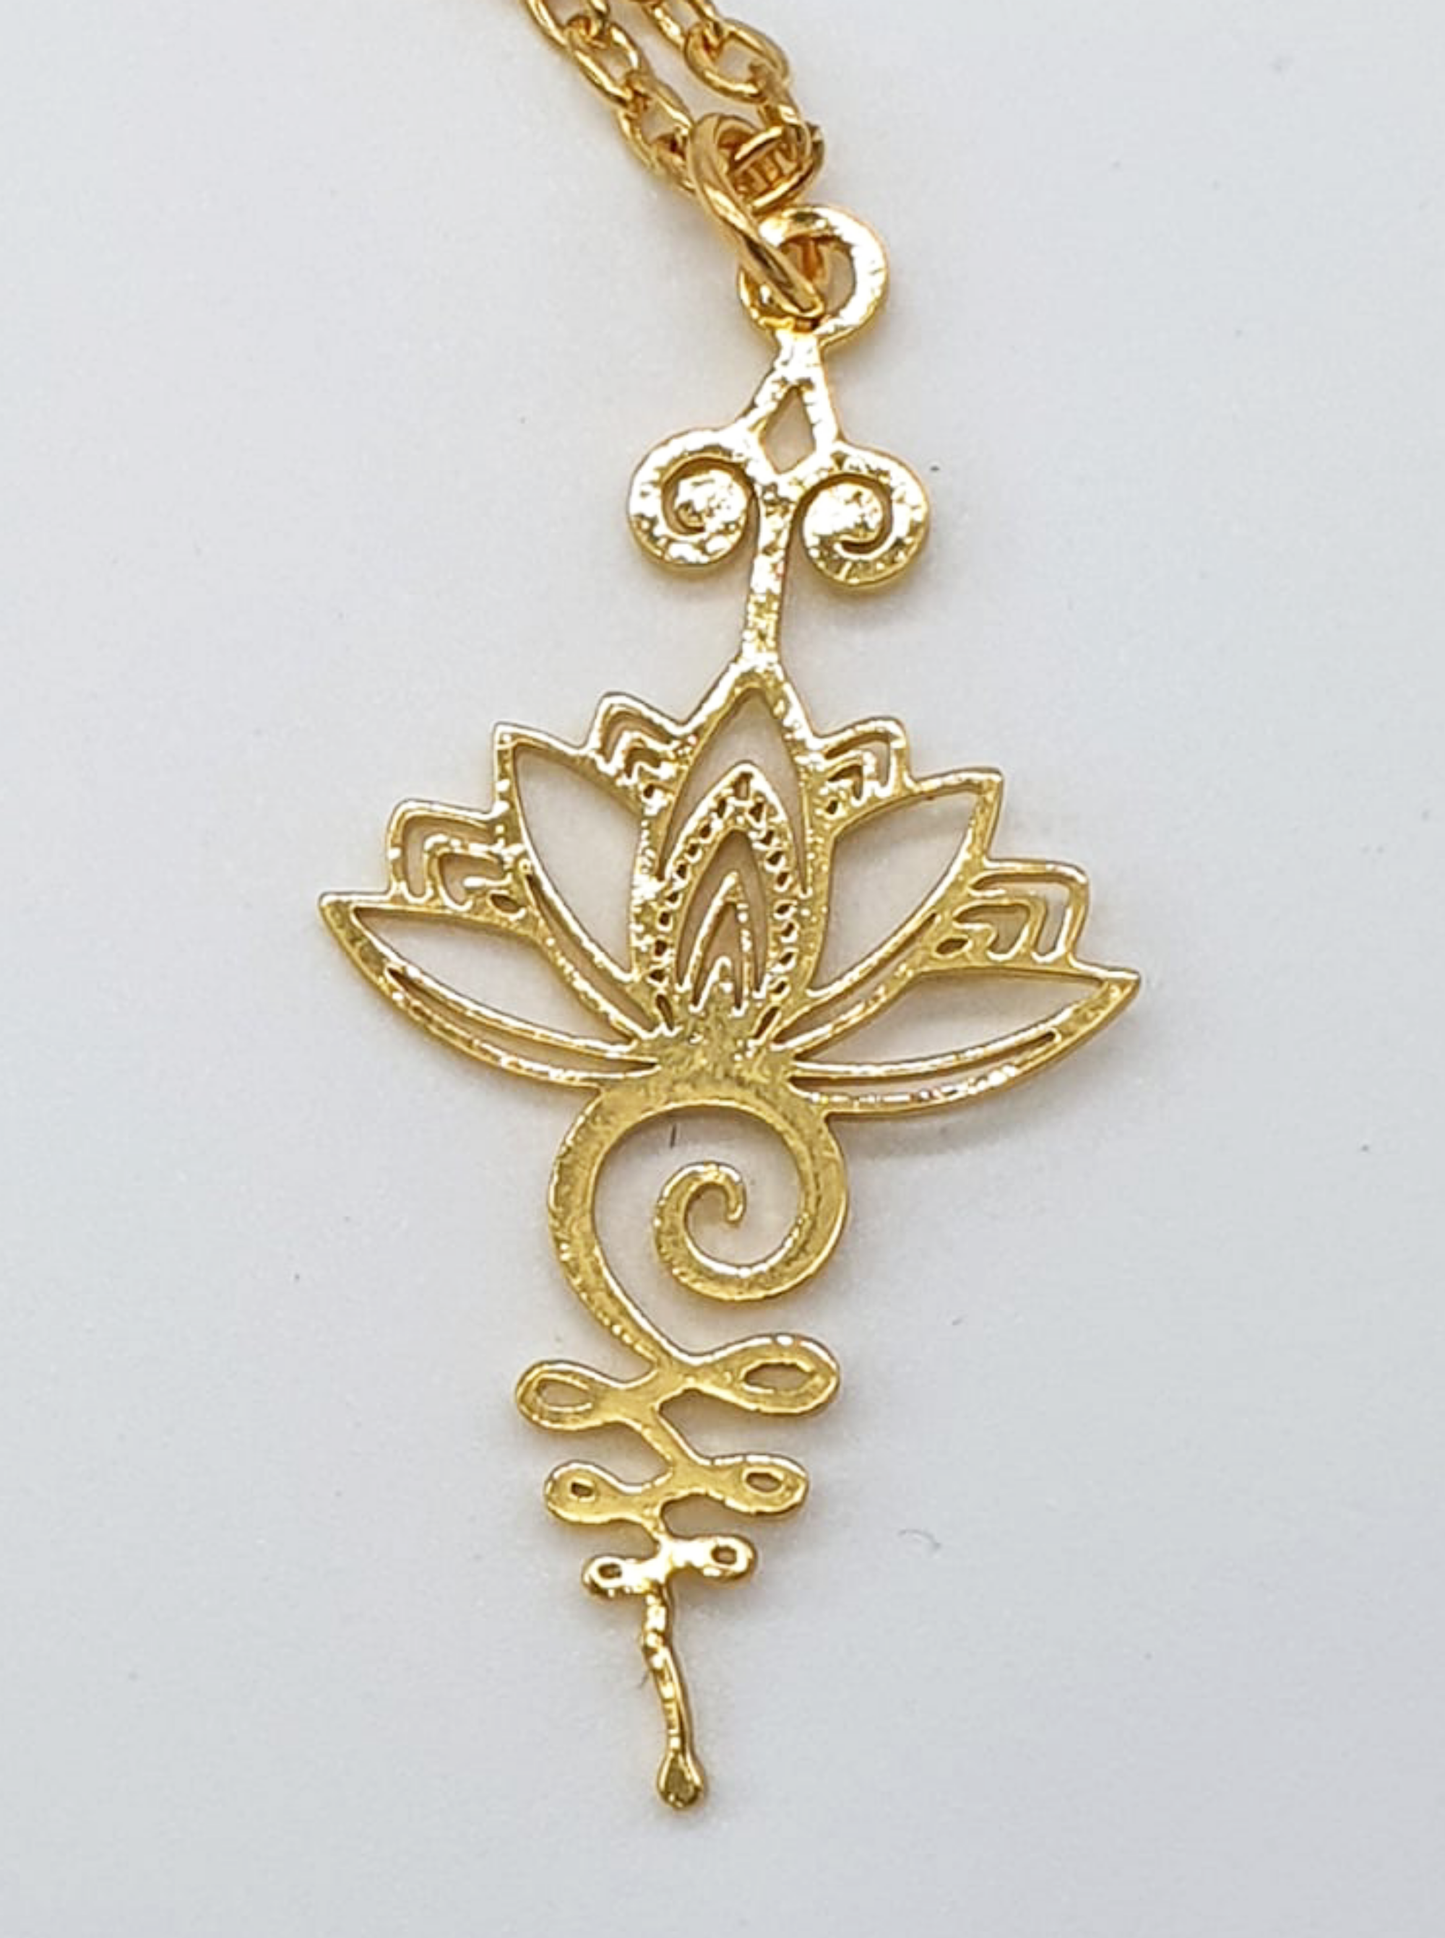 Unalome Necklace with Lotus Flower